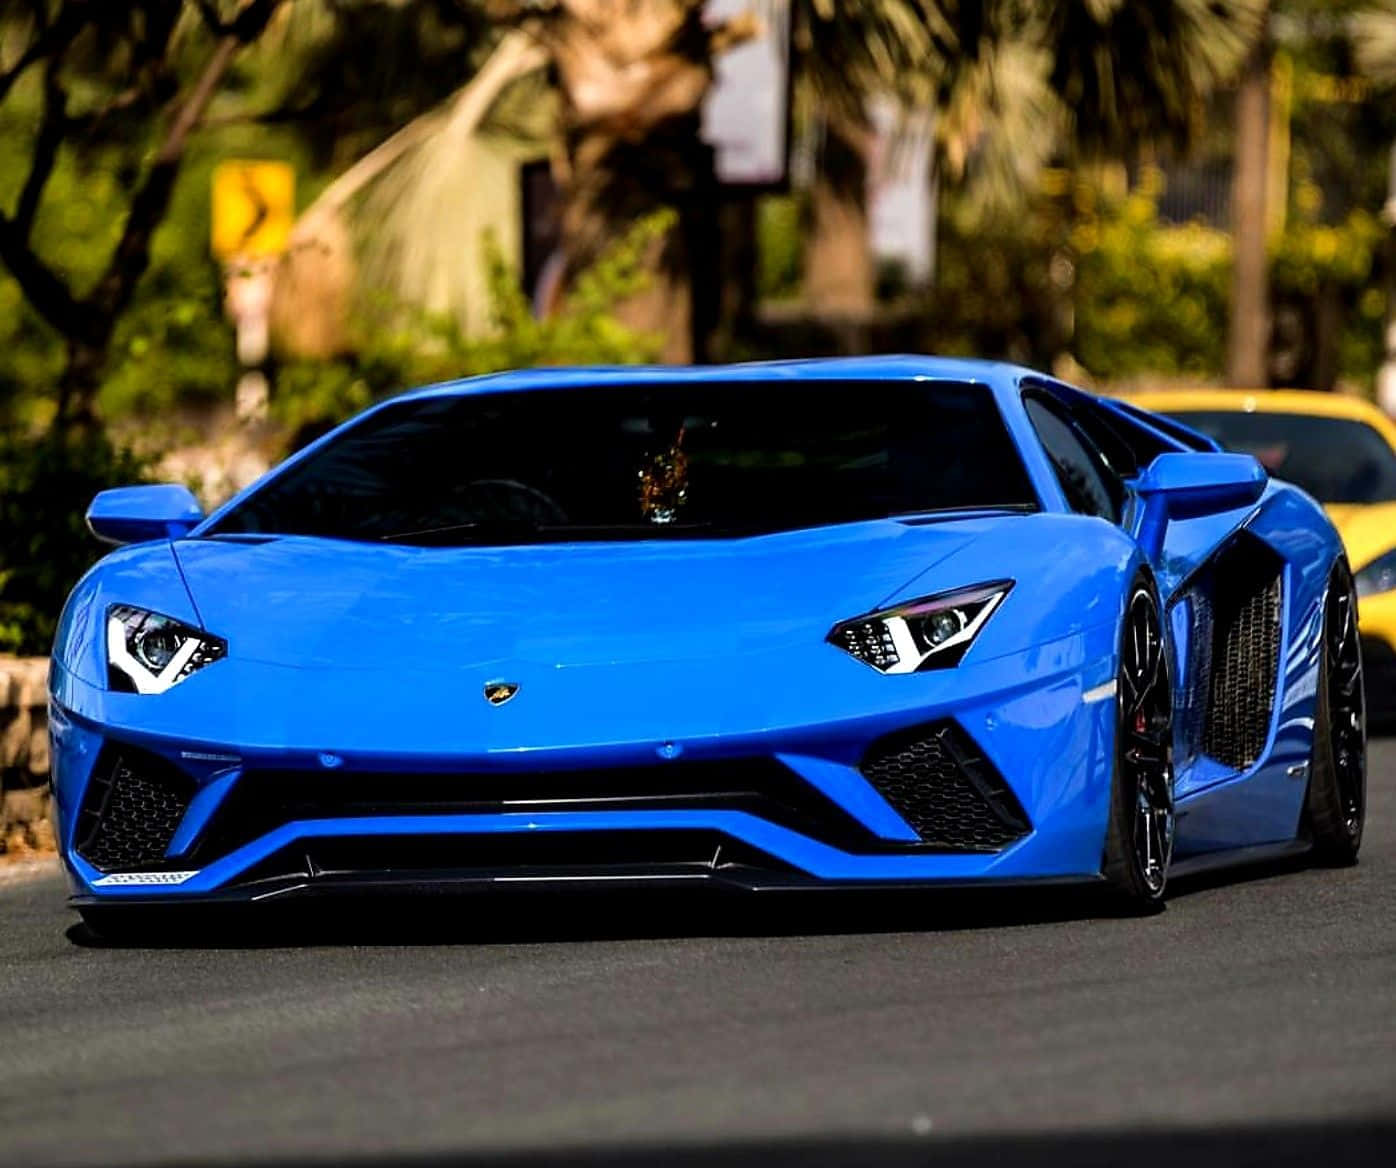 Download A Blue Sports Car Driving Down A Street | Wallpapers.com